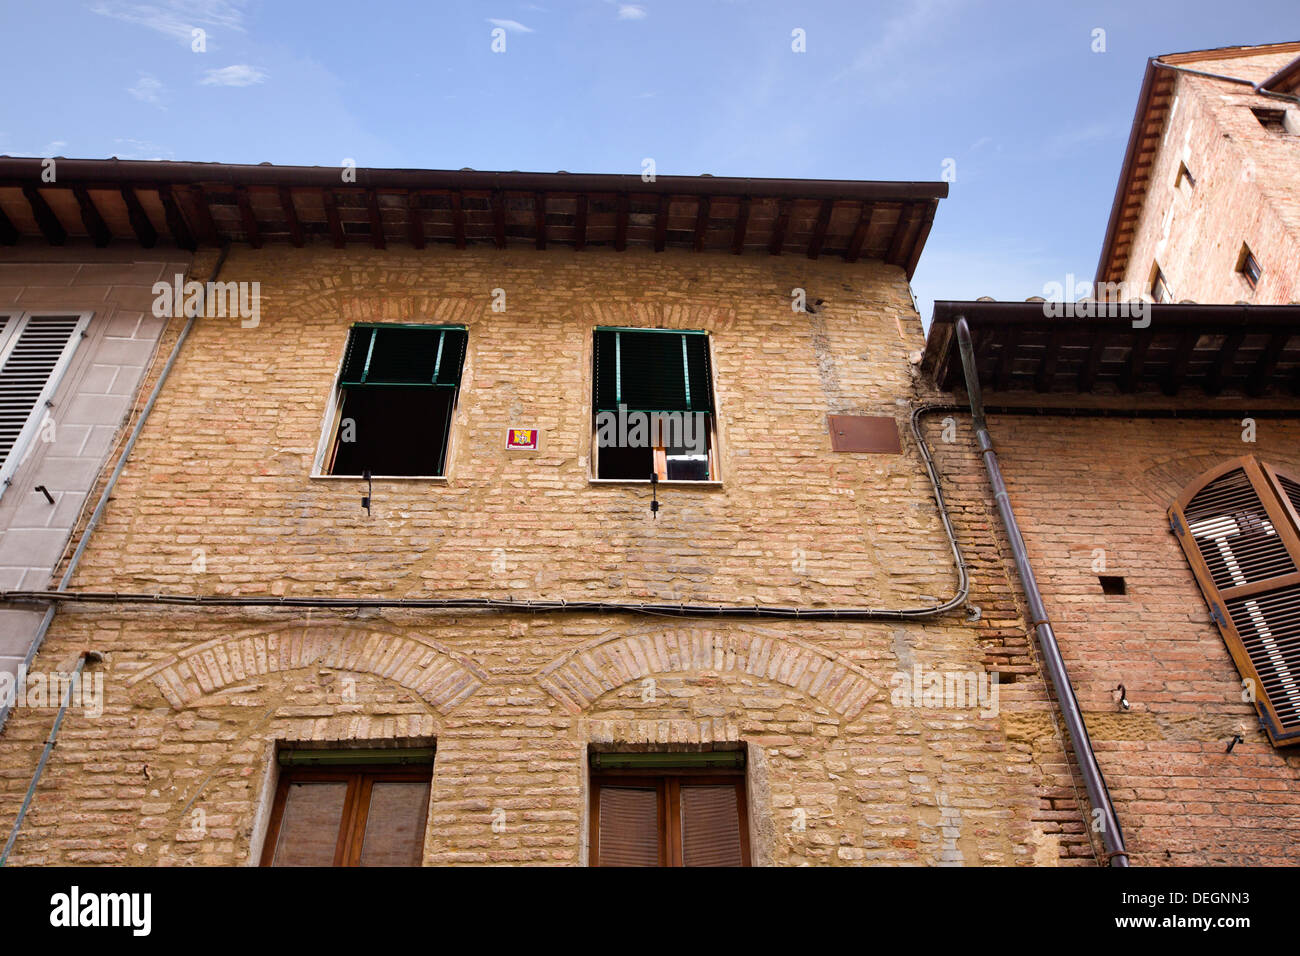 Low angle view of buildings, Sienne, Toscane, Italie Banque D'Images